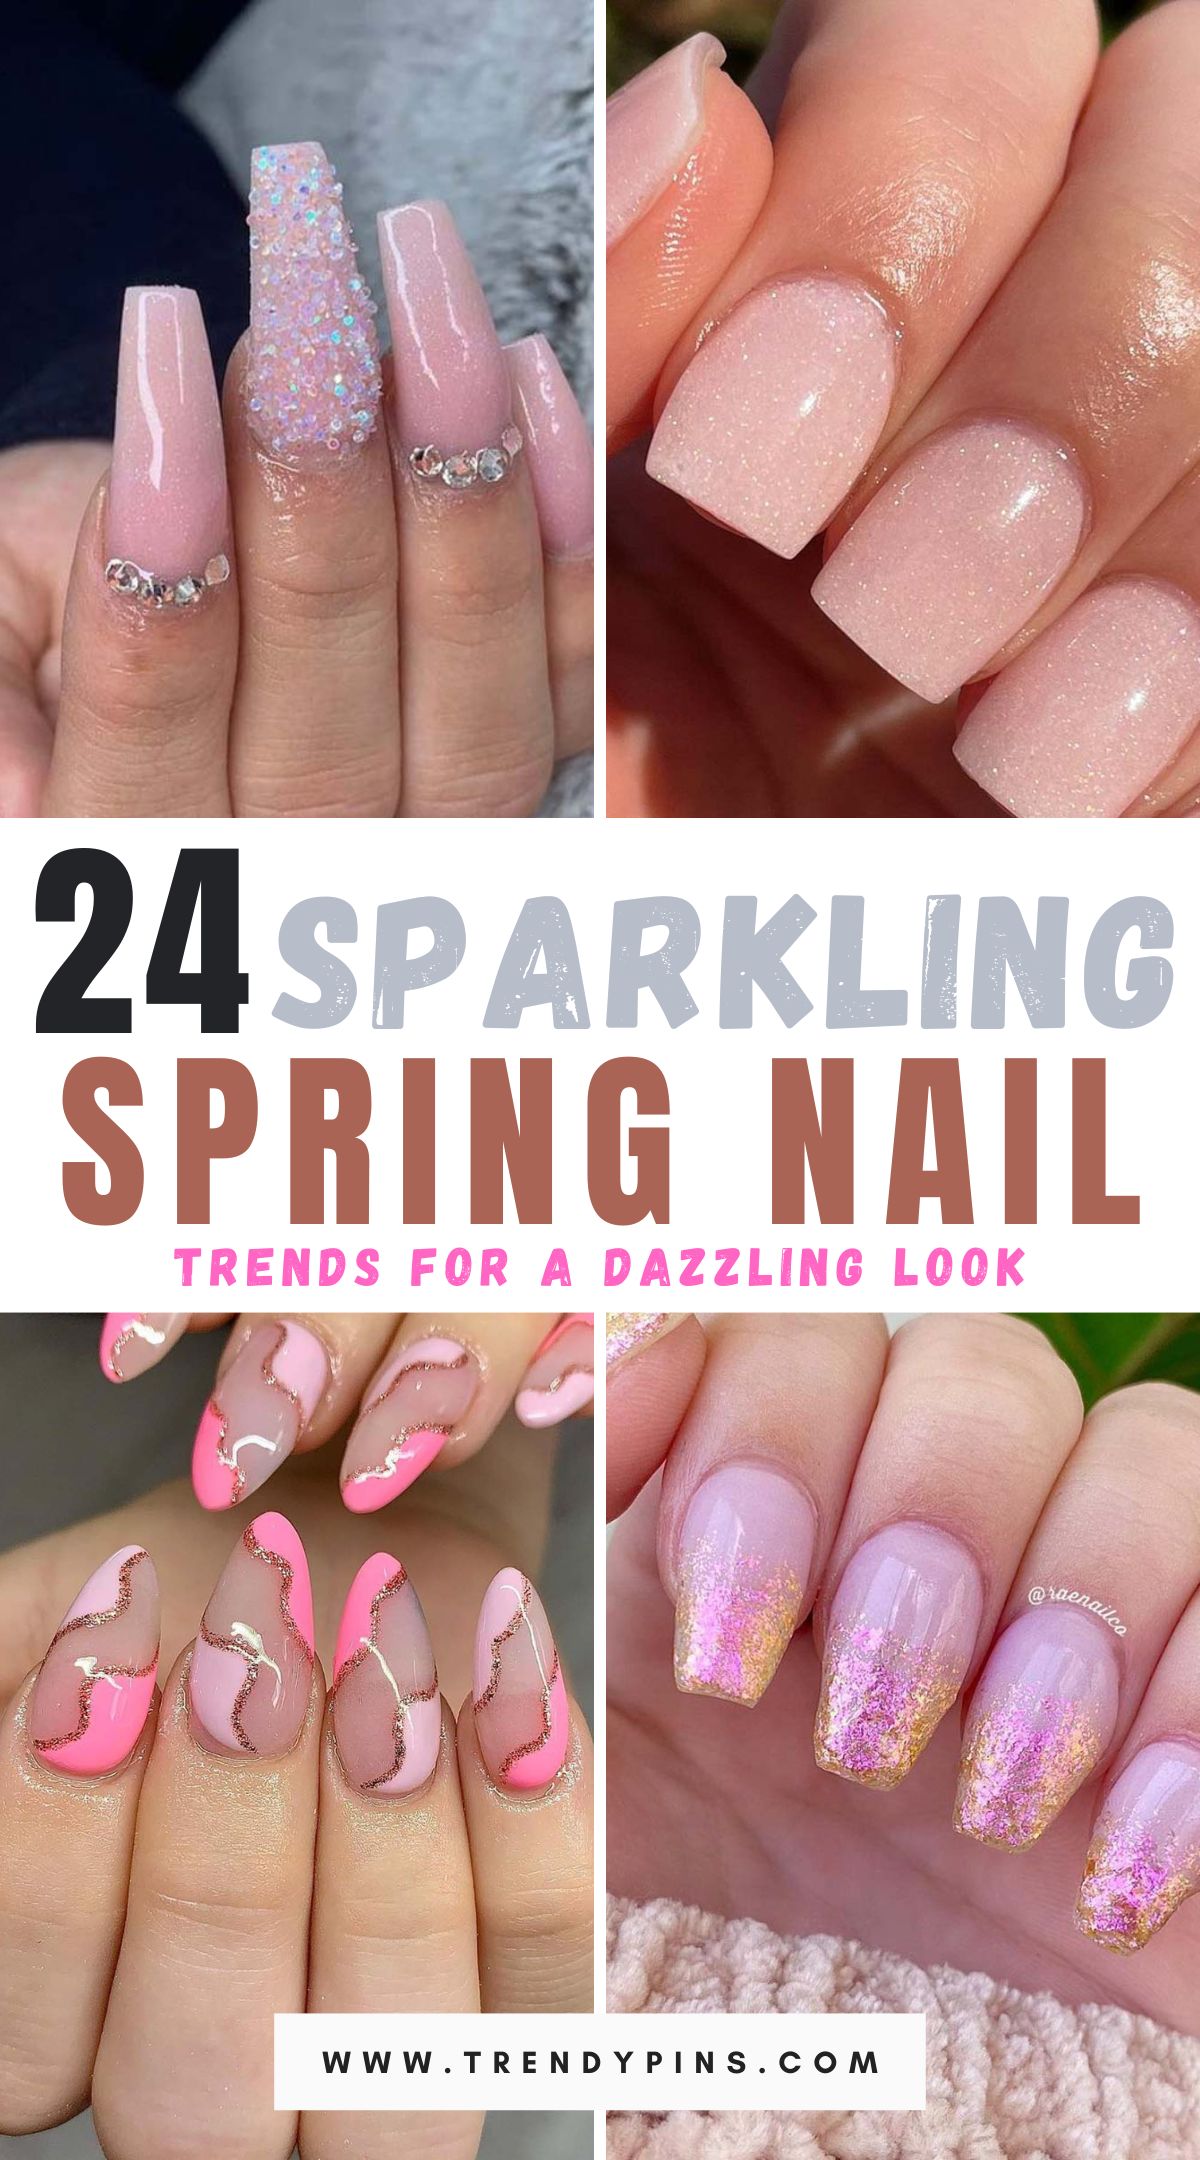 Discover 24 stunning spring nail trends with a sparkle twist from ThePinkGoose. Get inspired to shine with the latest dazzling designs!